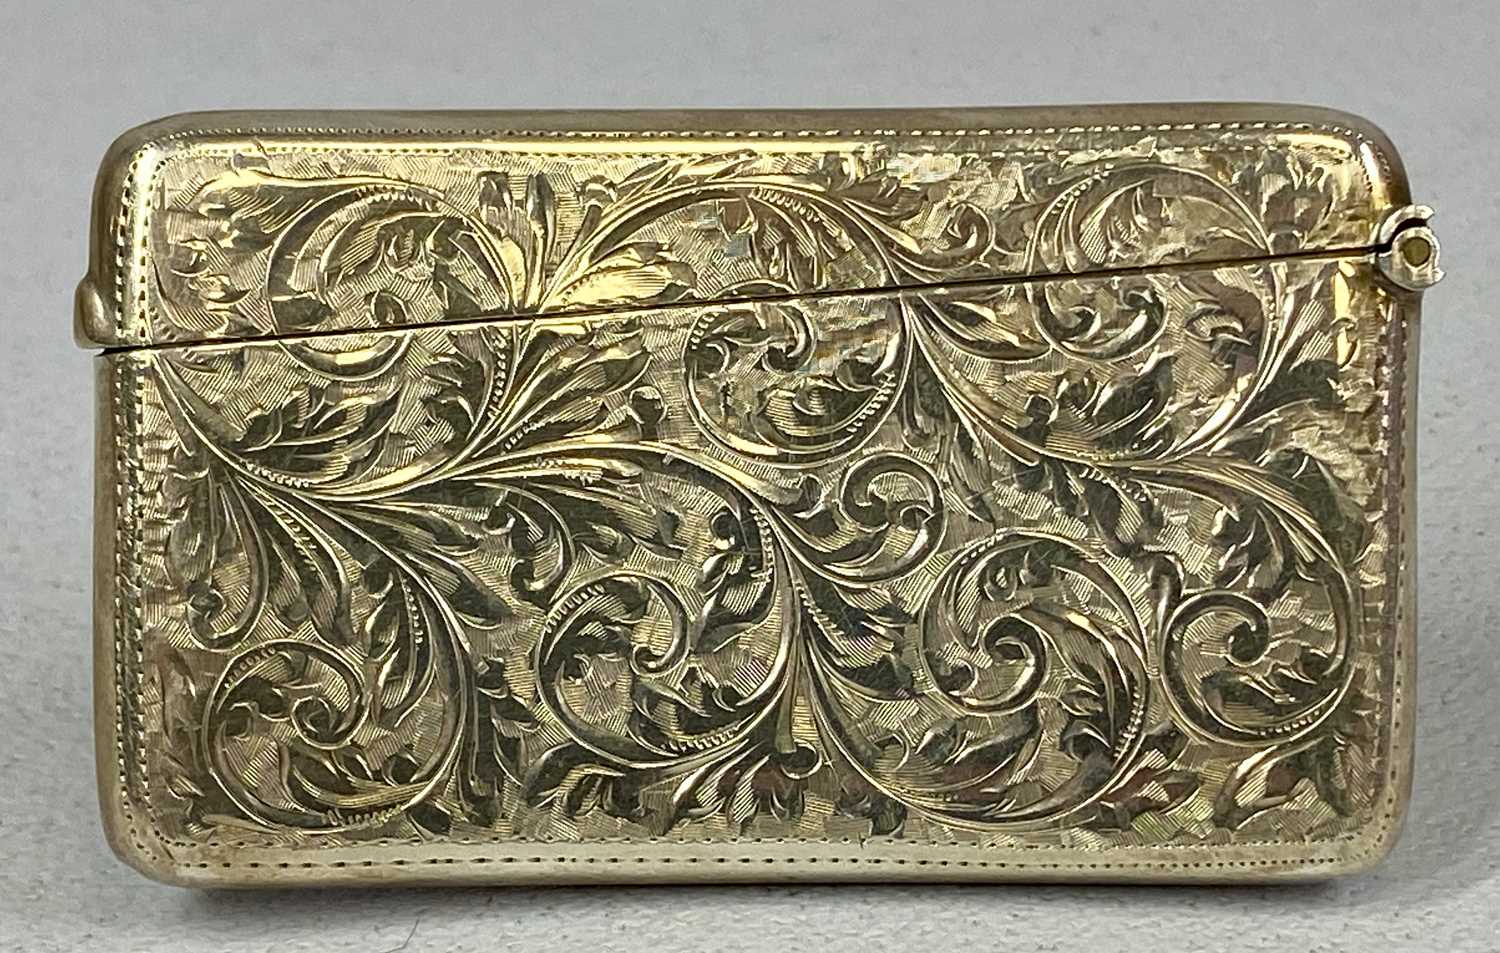 VICTORIAN SILVER CARD CASE of curved form, with foliate scroll decoration and cartouche with - Image 7 of 7